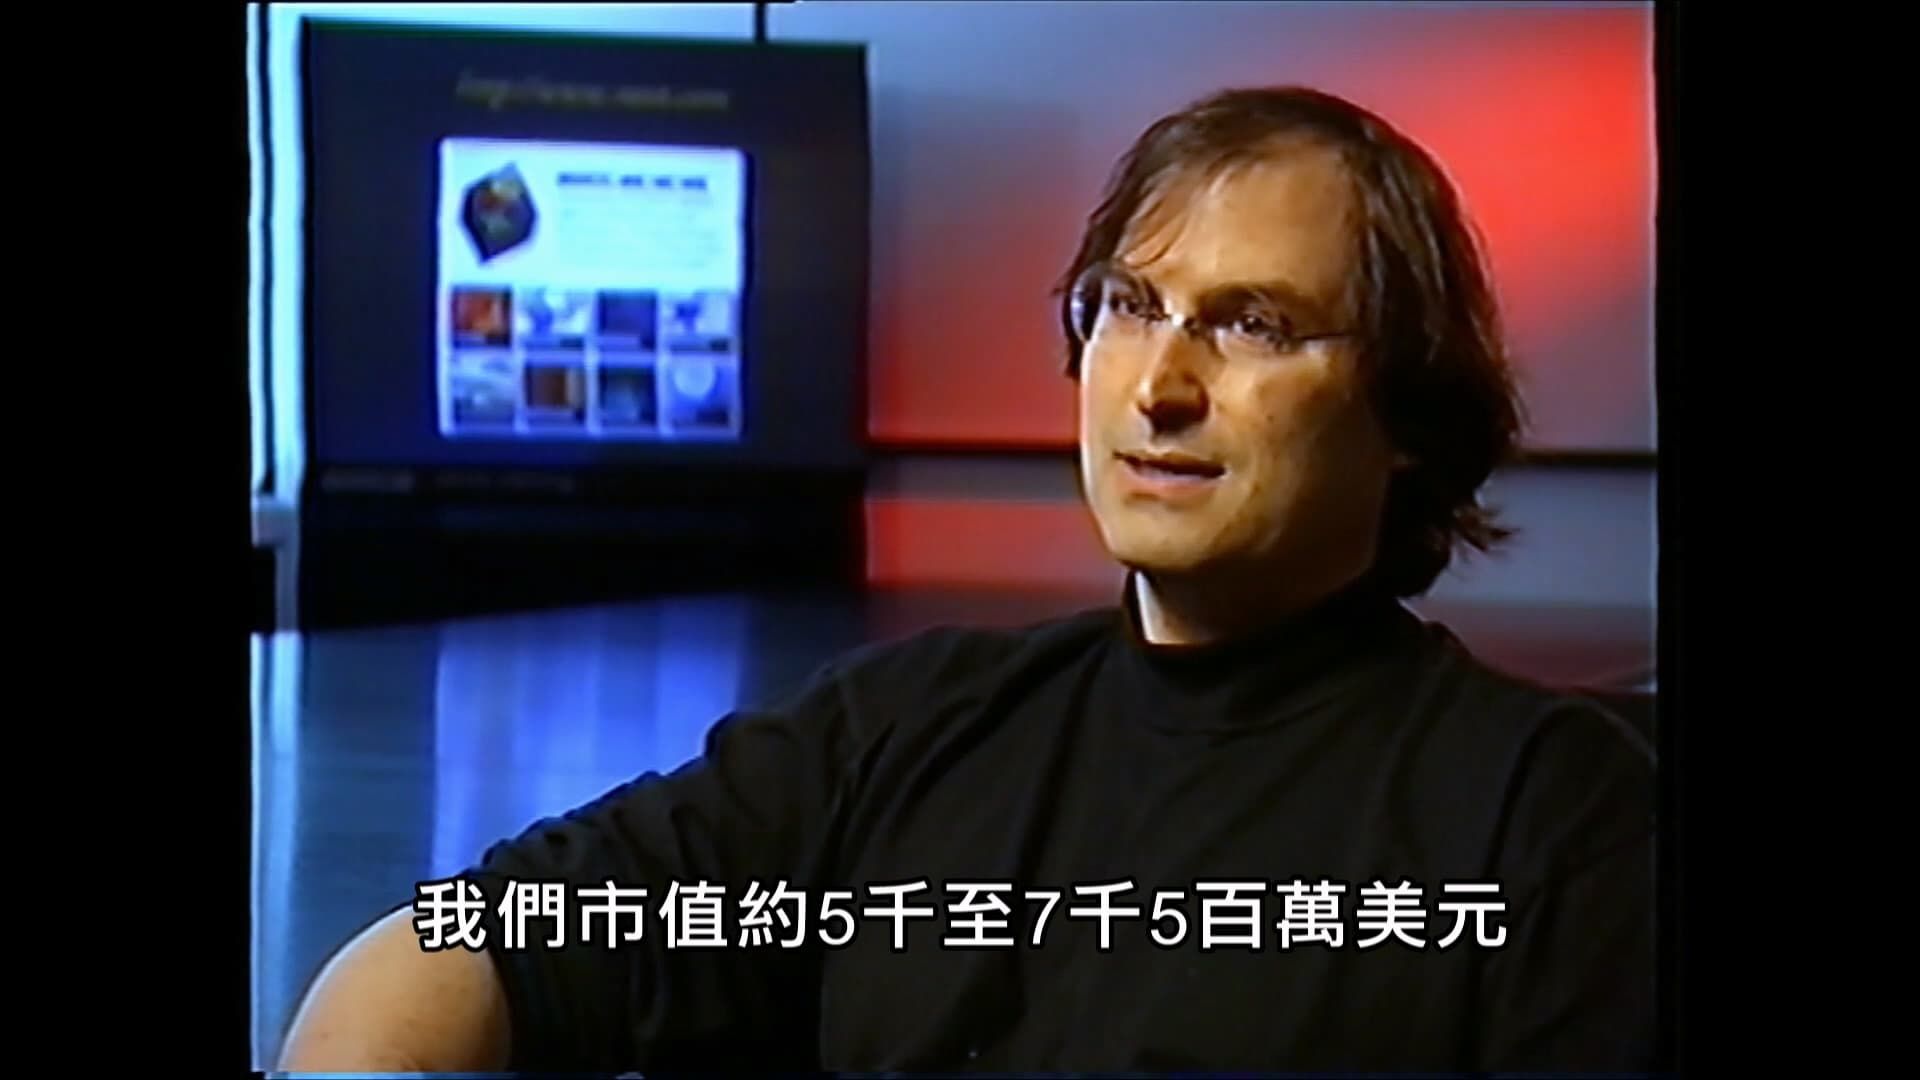 Steve Jobs: The Lost Interview background